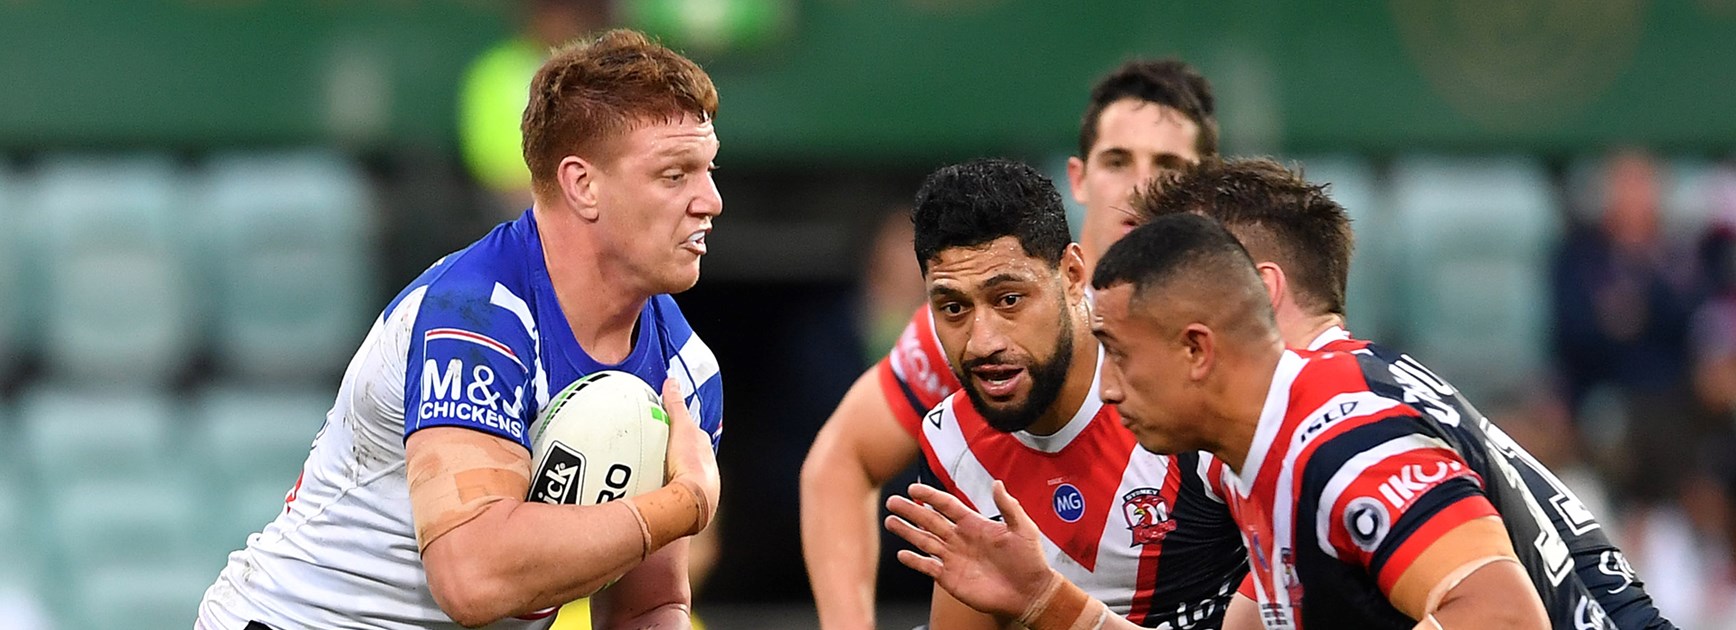 Match Preview | Bulldogs v Roosters